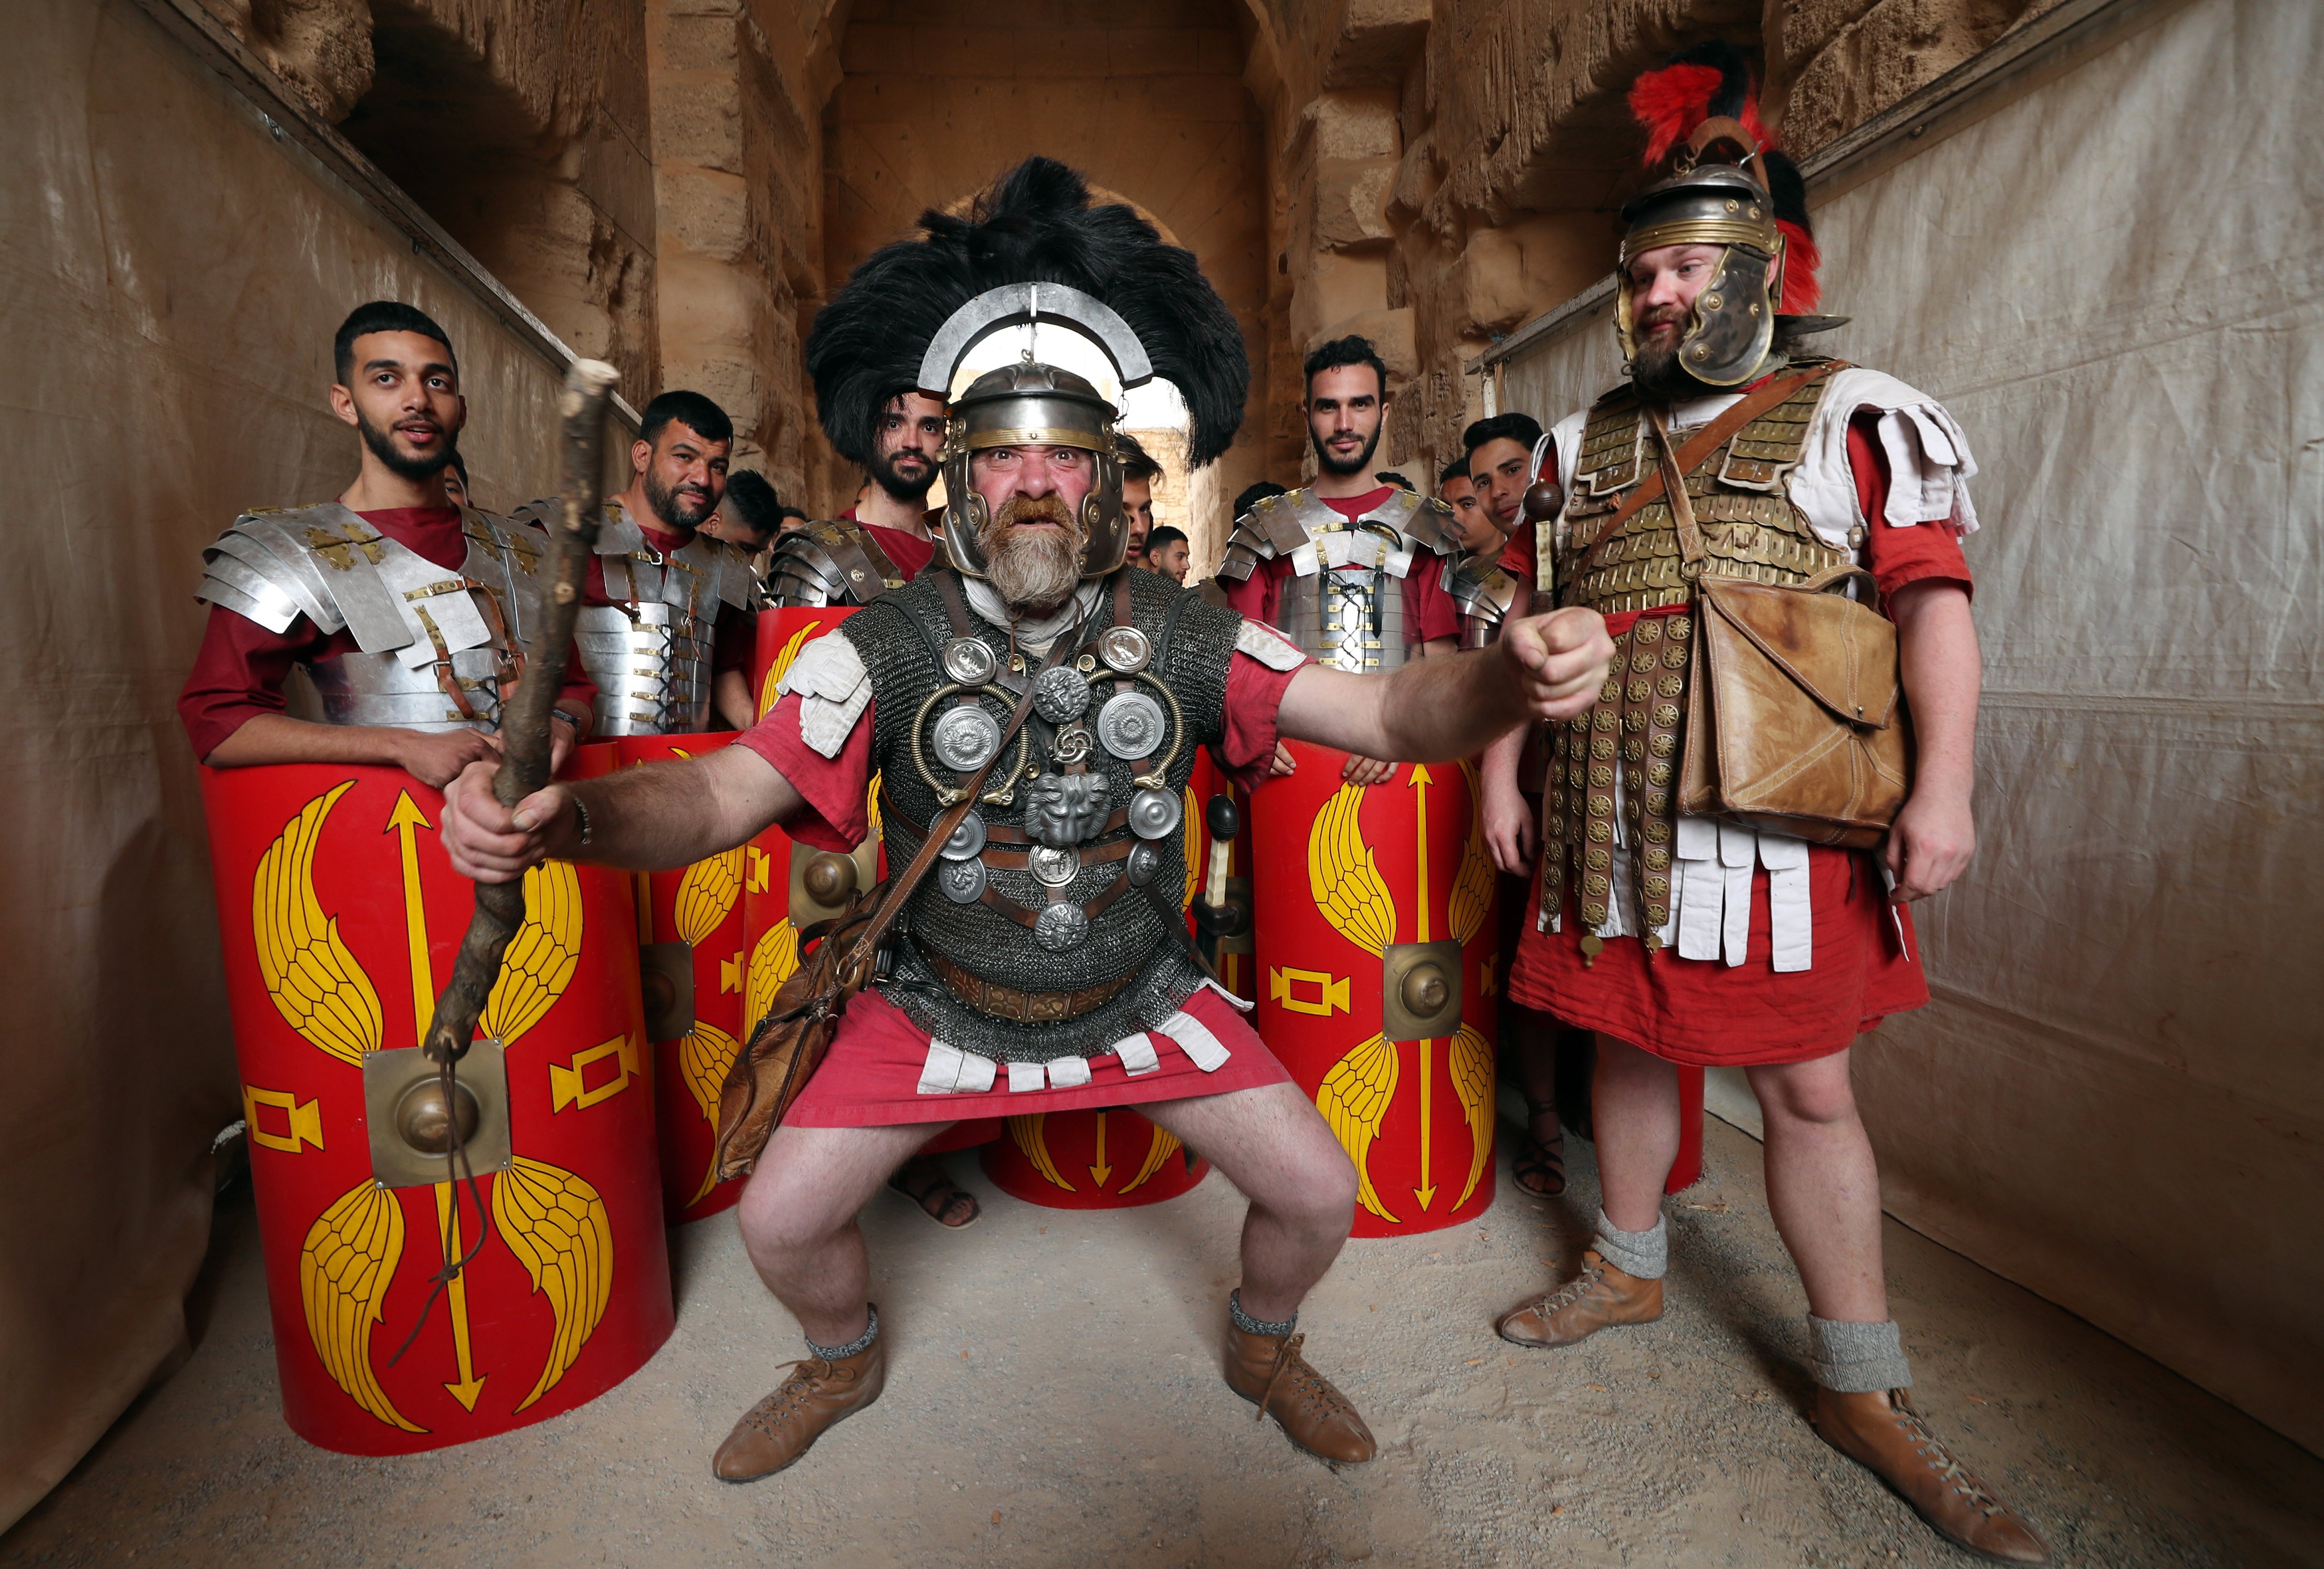 People wearing costumes from the Roman Empire period perform in the “Rome Days” festival in Tunisia. Photo: EPA-EFE